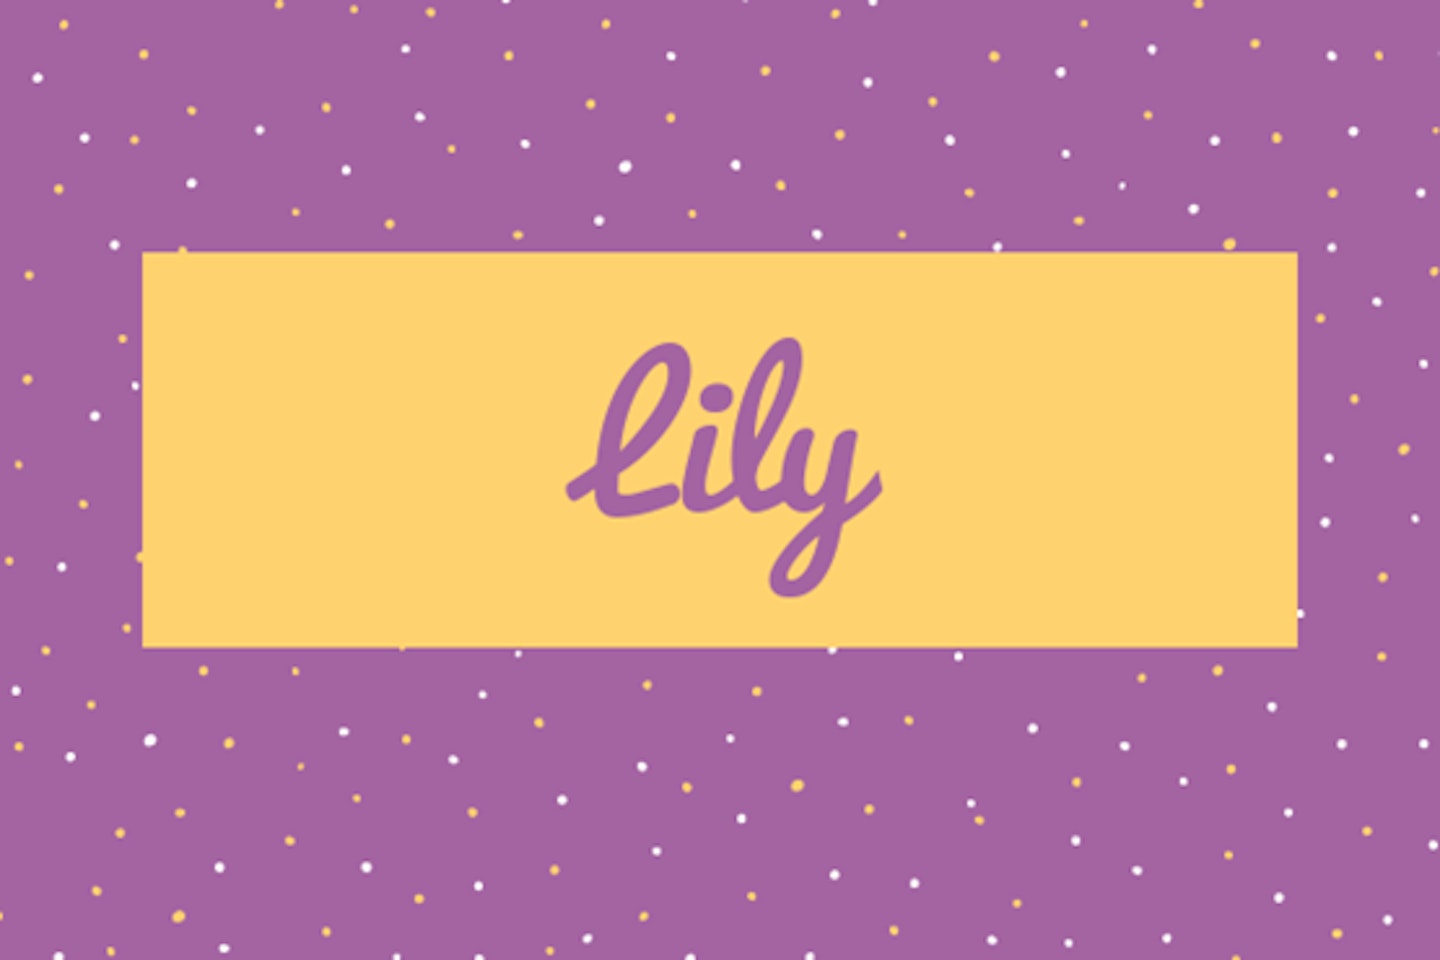 41) Lily